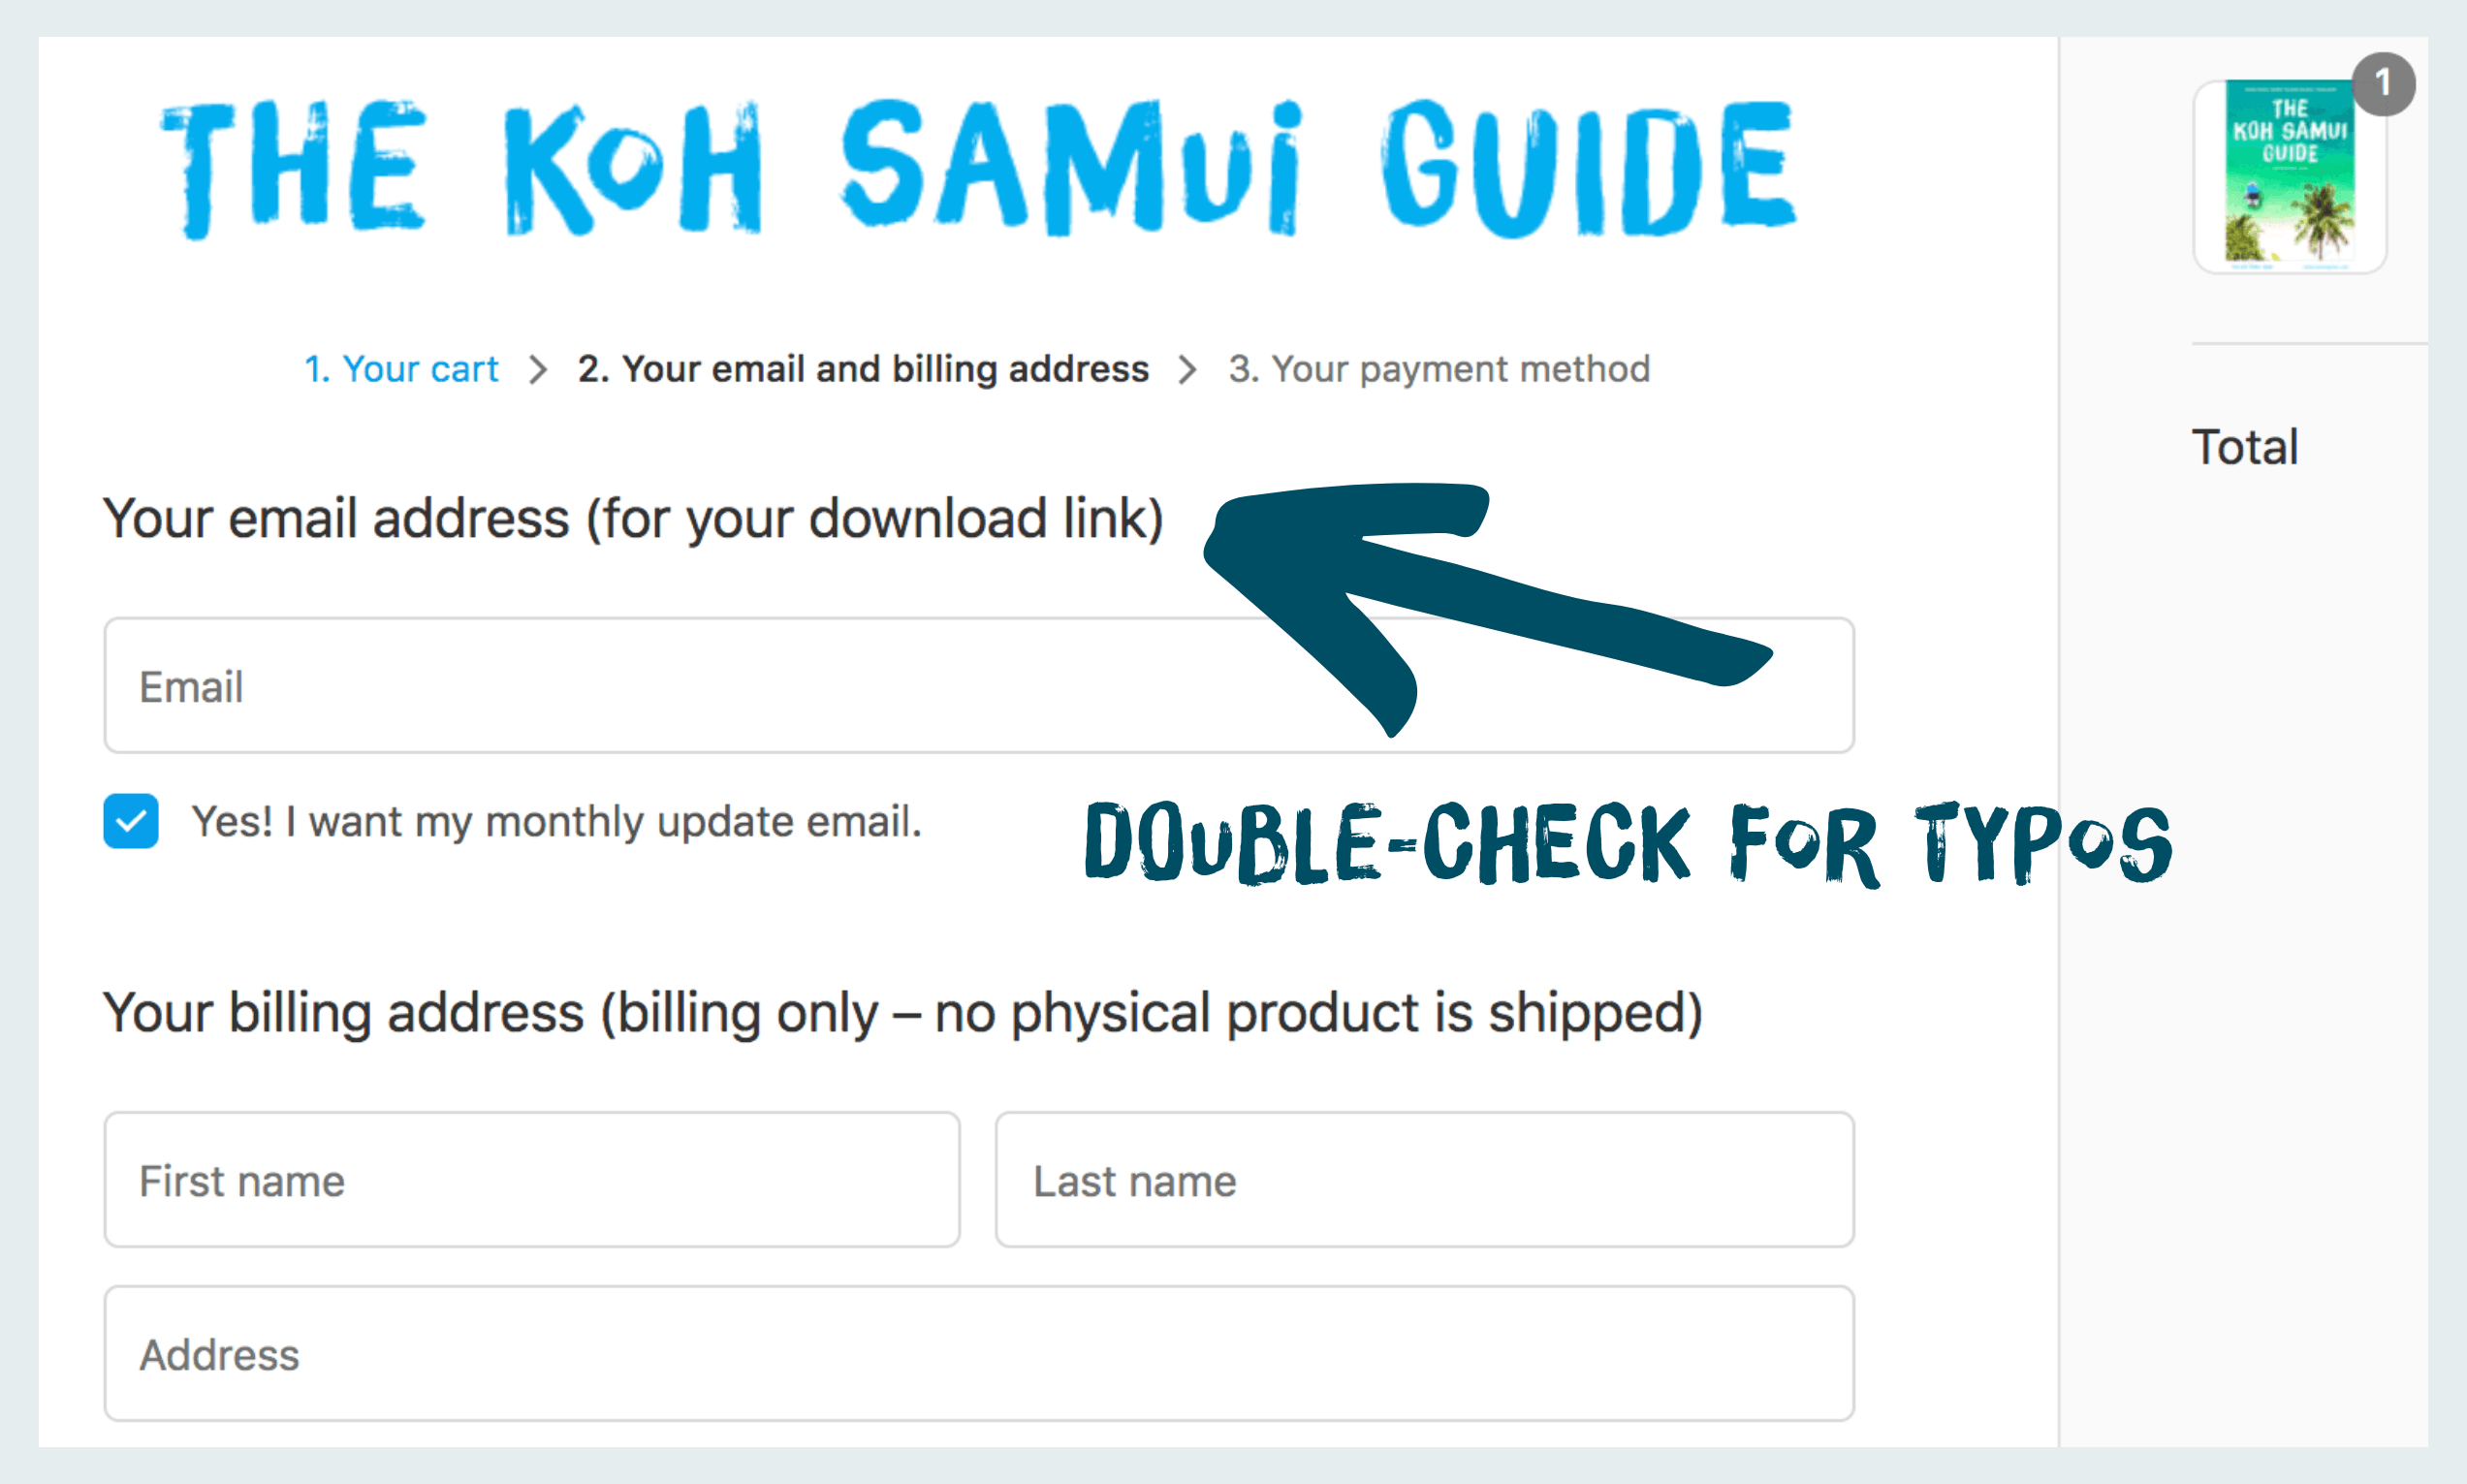 Step-by-step instructions for how to purchase The Koh Samui Guide with a credit card: Step two – check your email address for typos